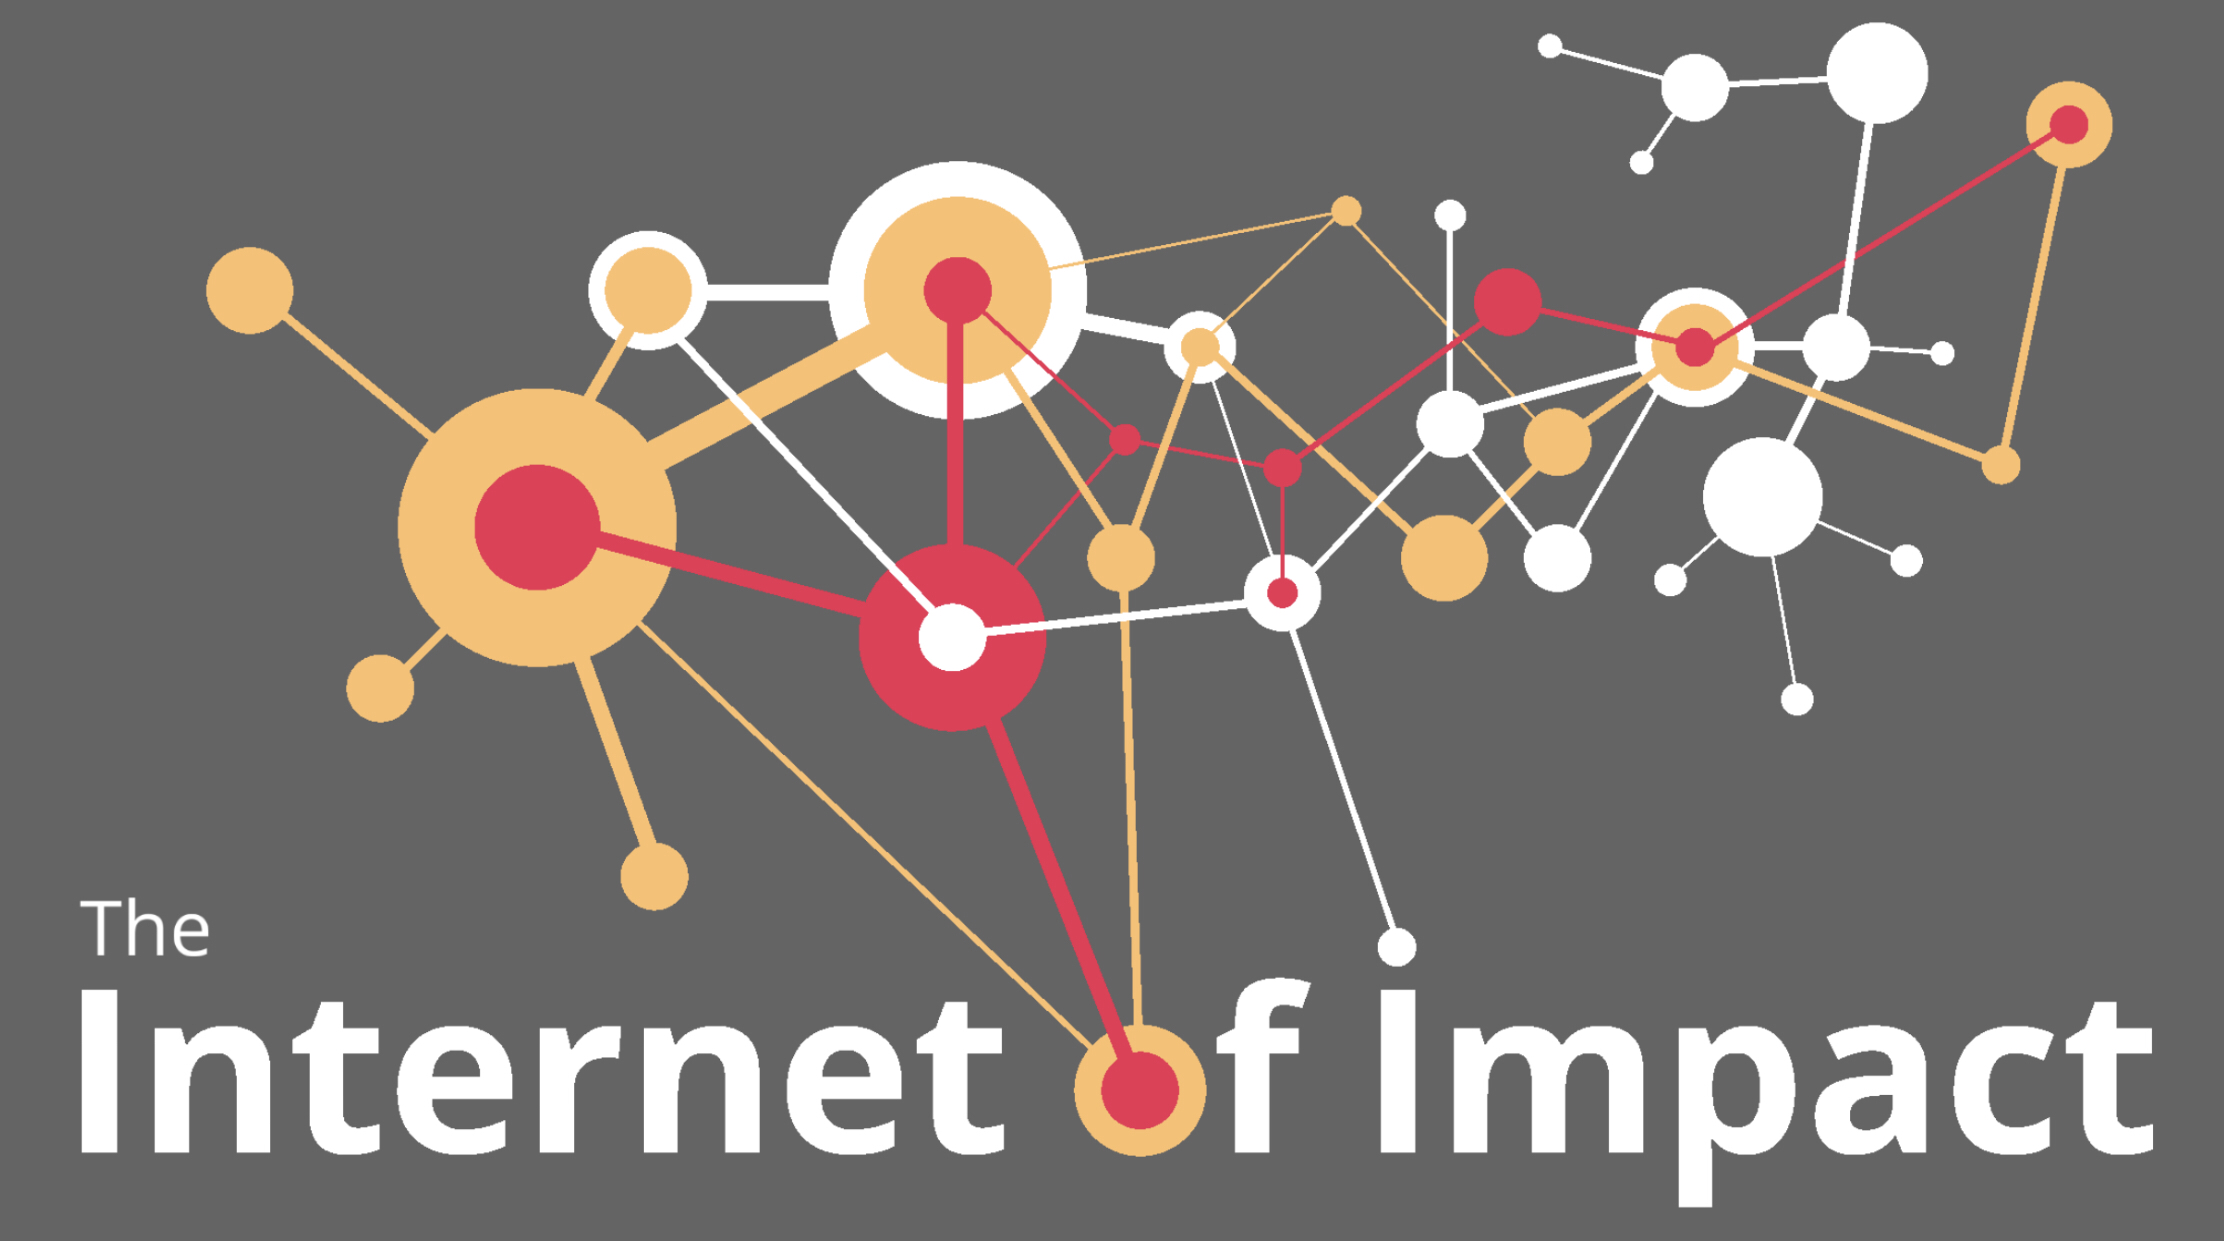 The internet of impact